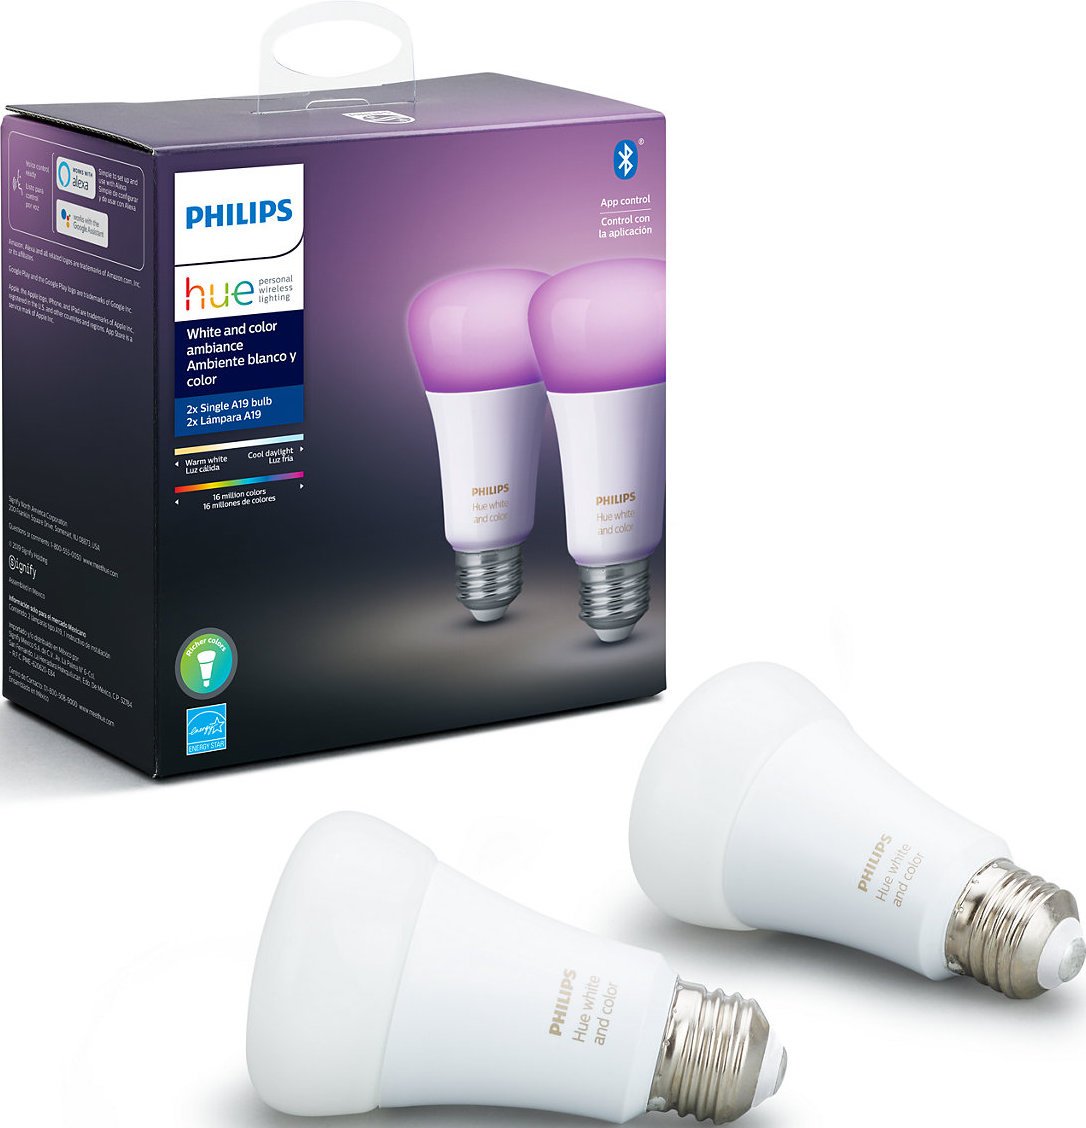 Philips Hue White And Color Ambiance 2pack